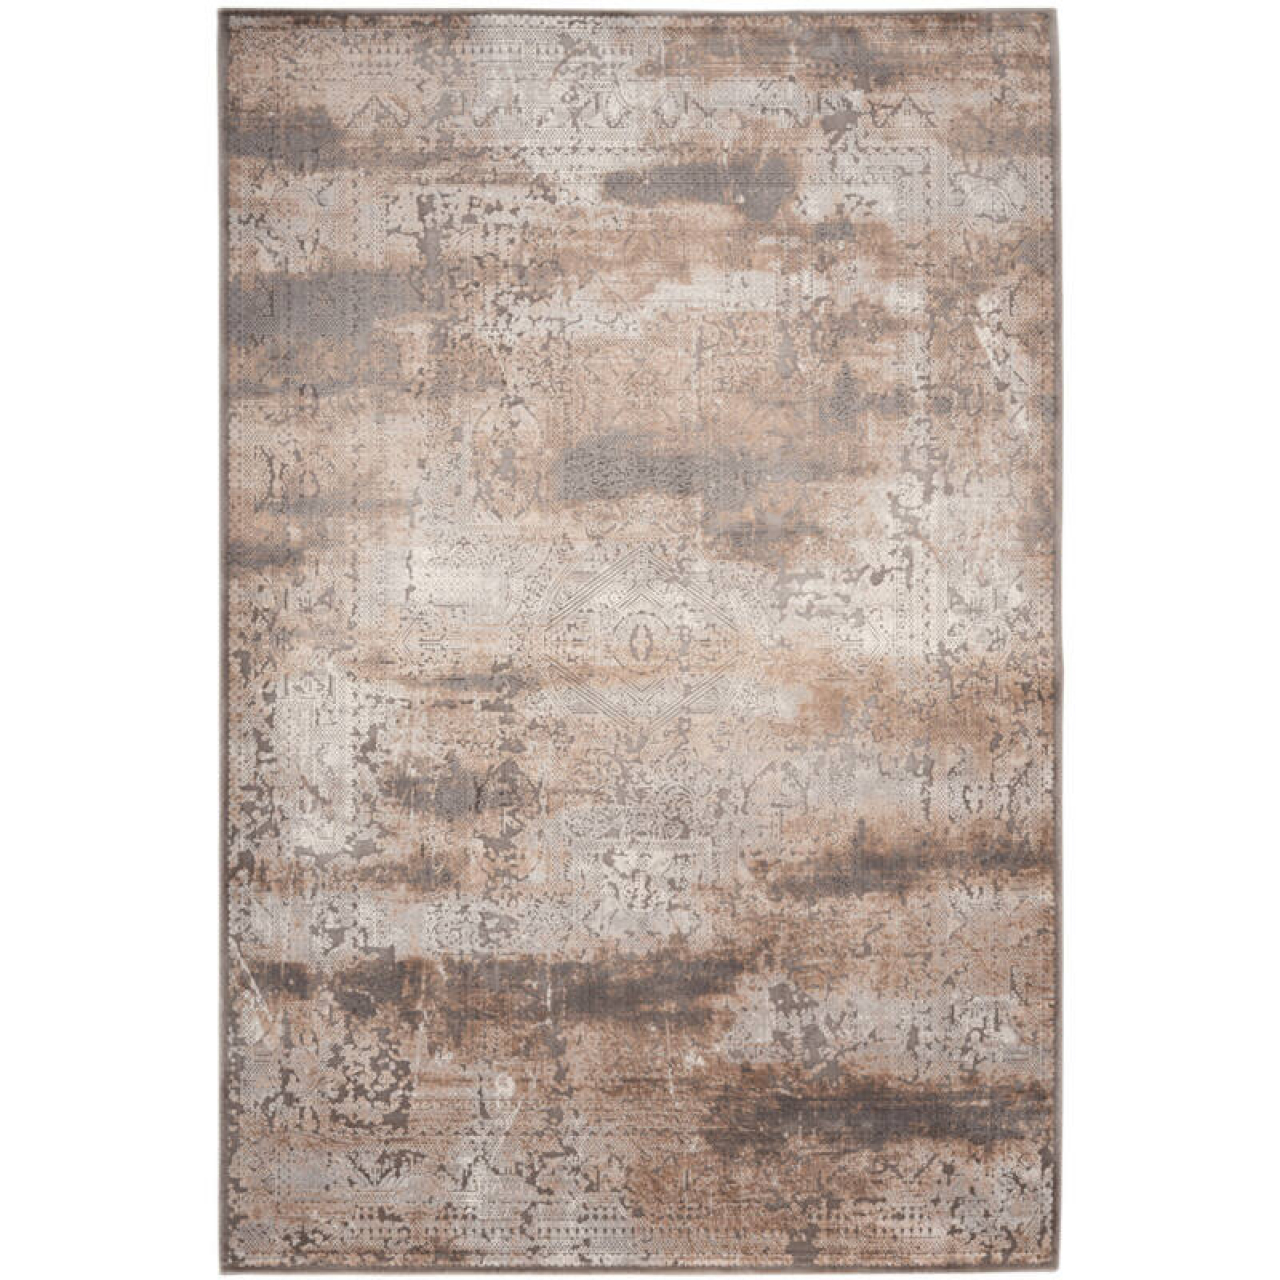 Obsession Haute Couture Jewel 950 Taupe szőnyeg-140x200